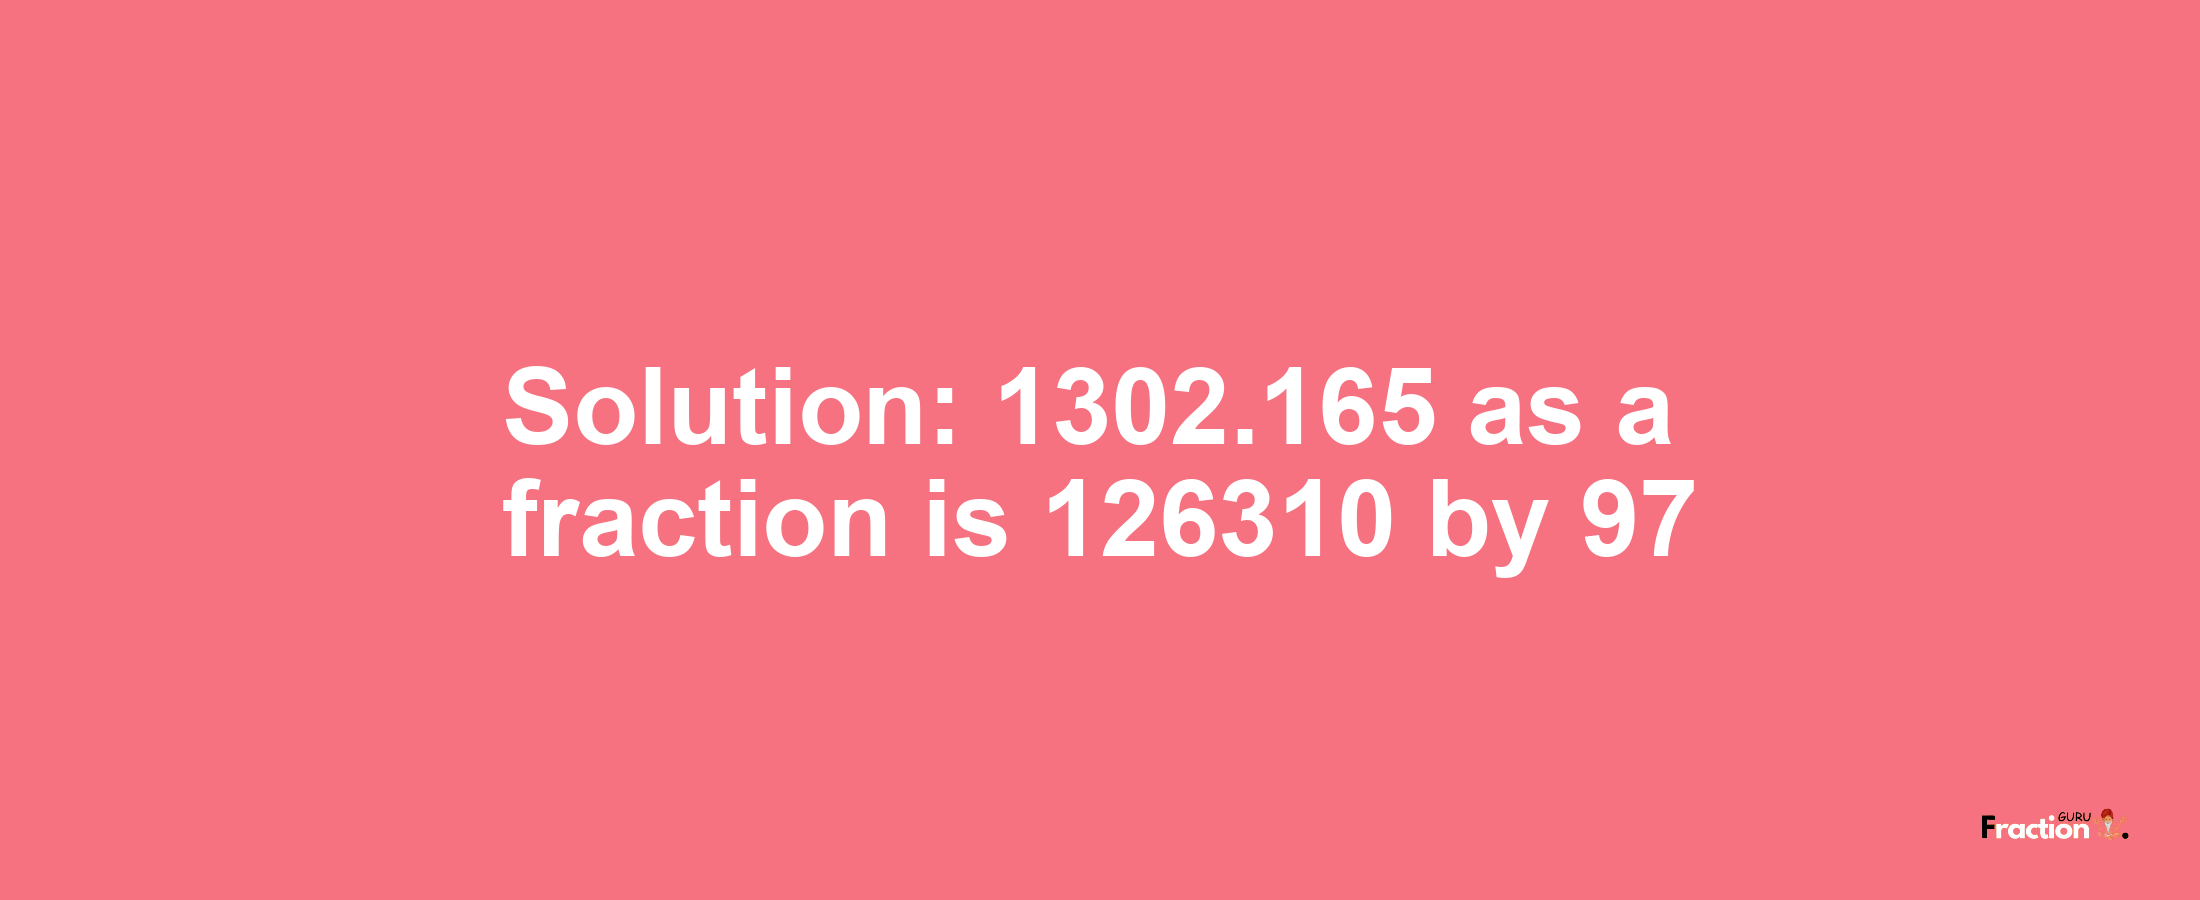 Solution:1302.165 as a fraction is 126310/97